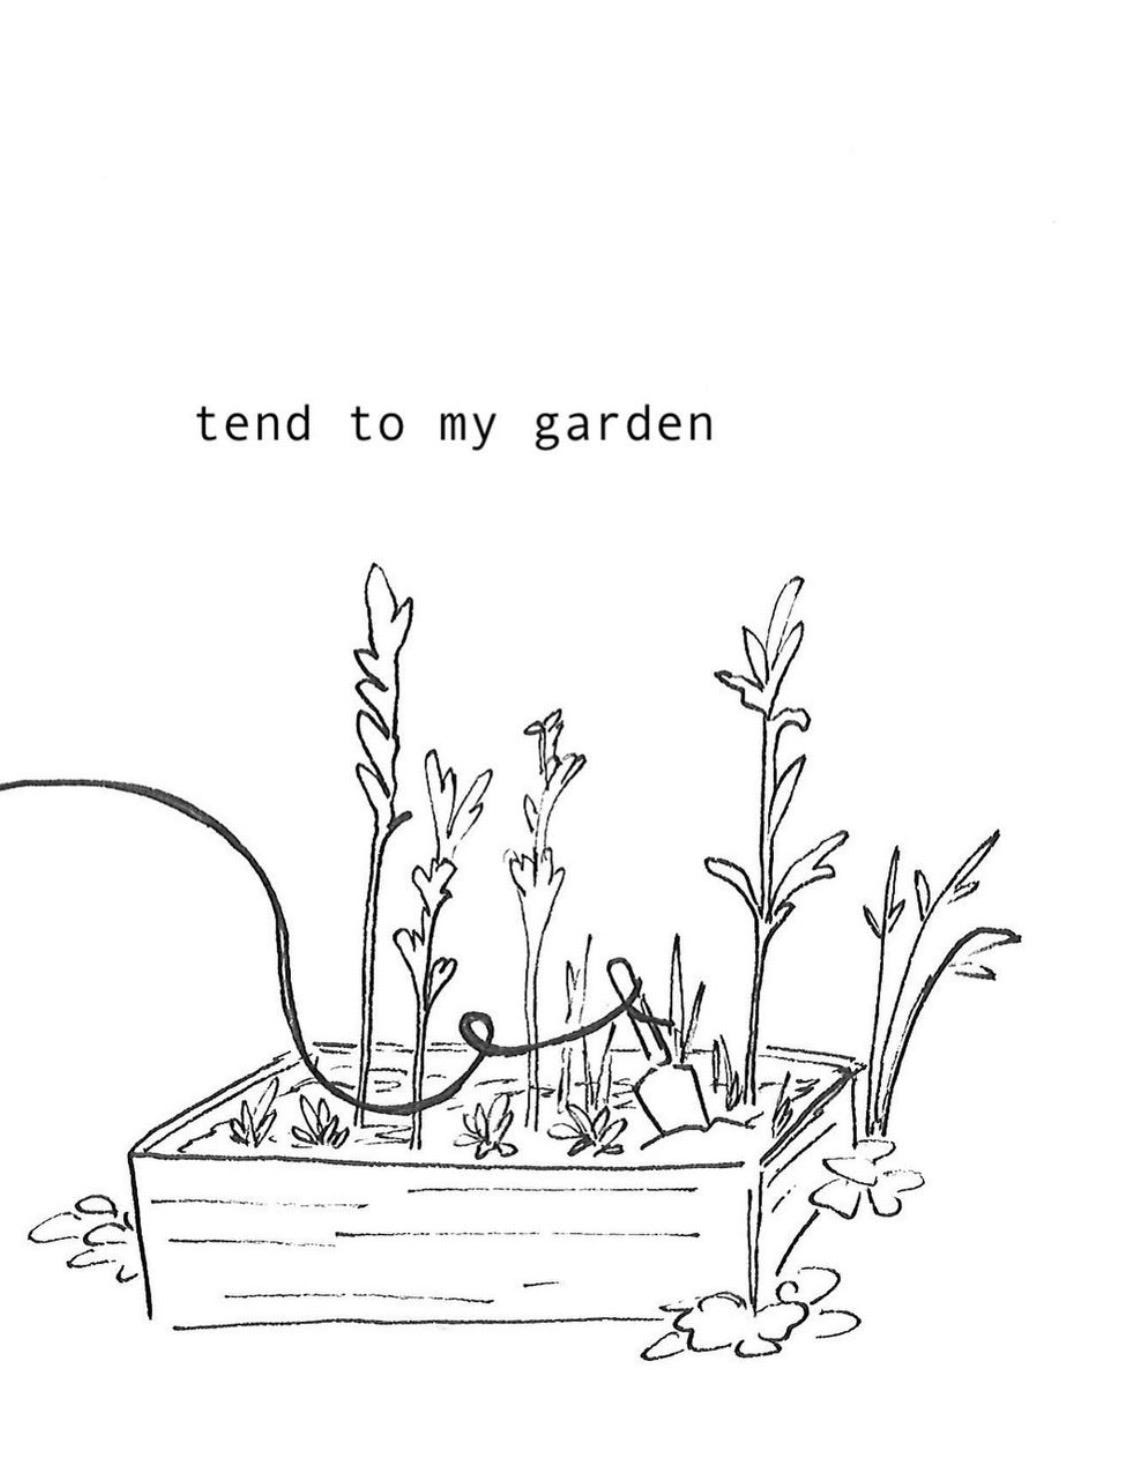 "tend to my garden" the hair digs with a small spade in a flower box with sprouts growing up, not very neatly. 